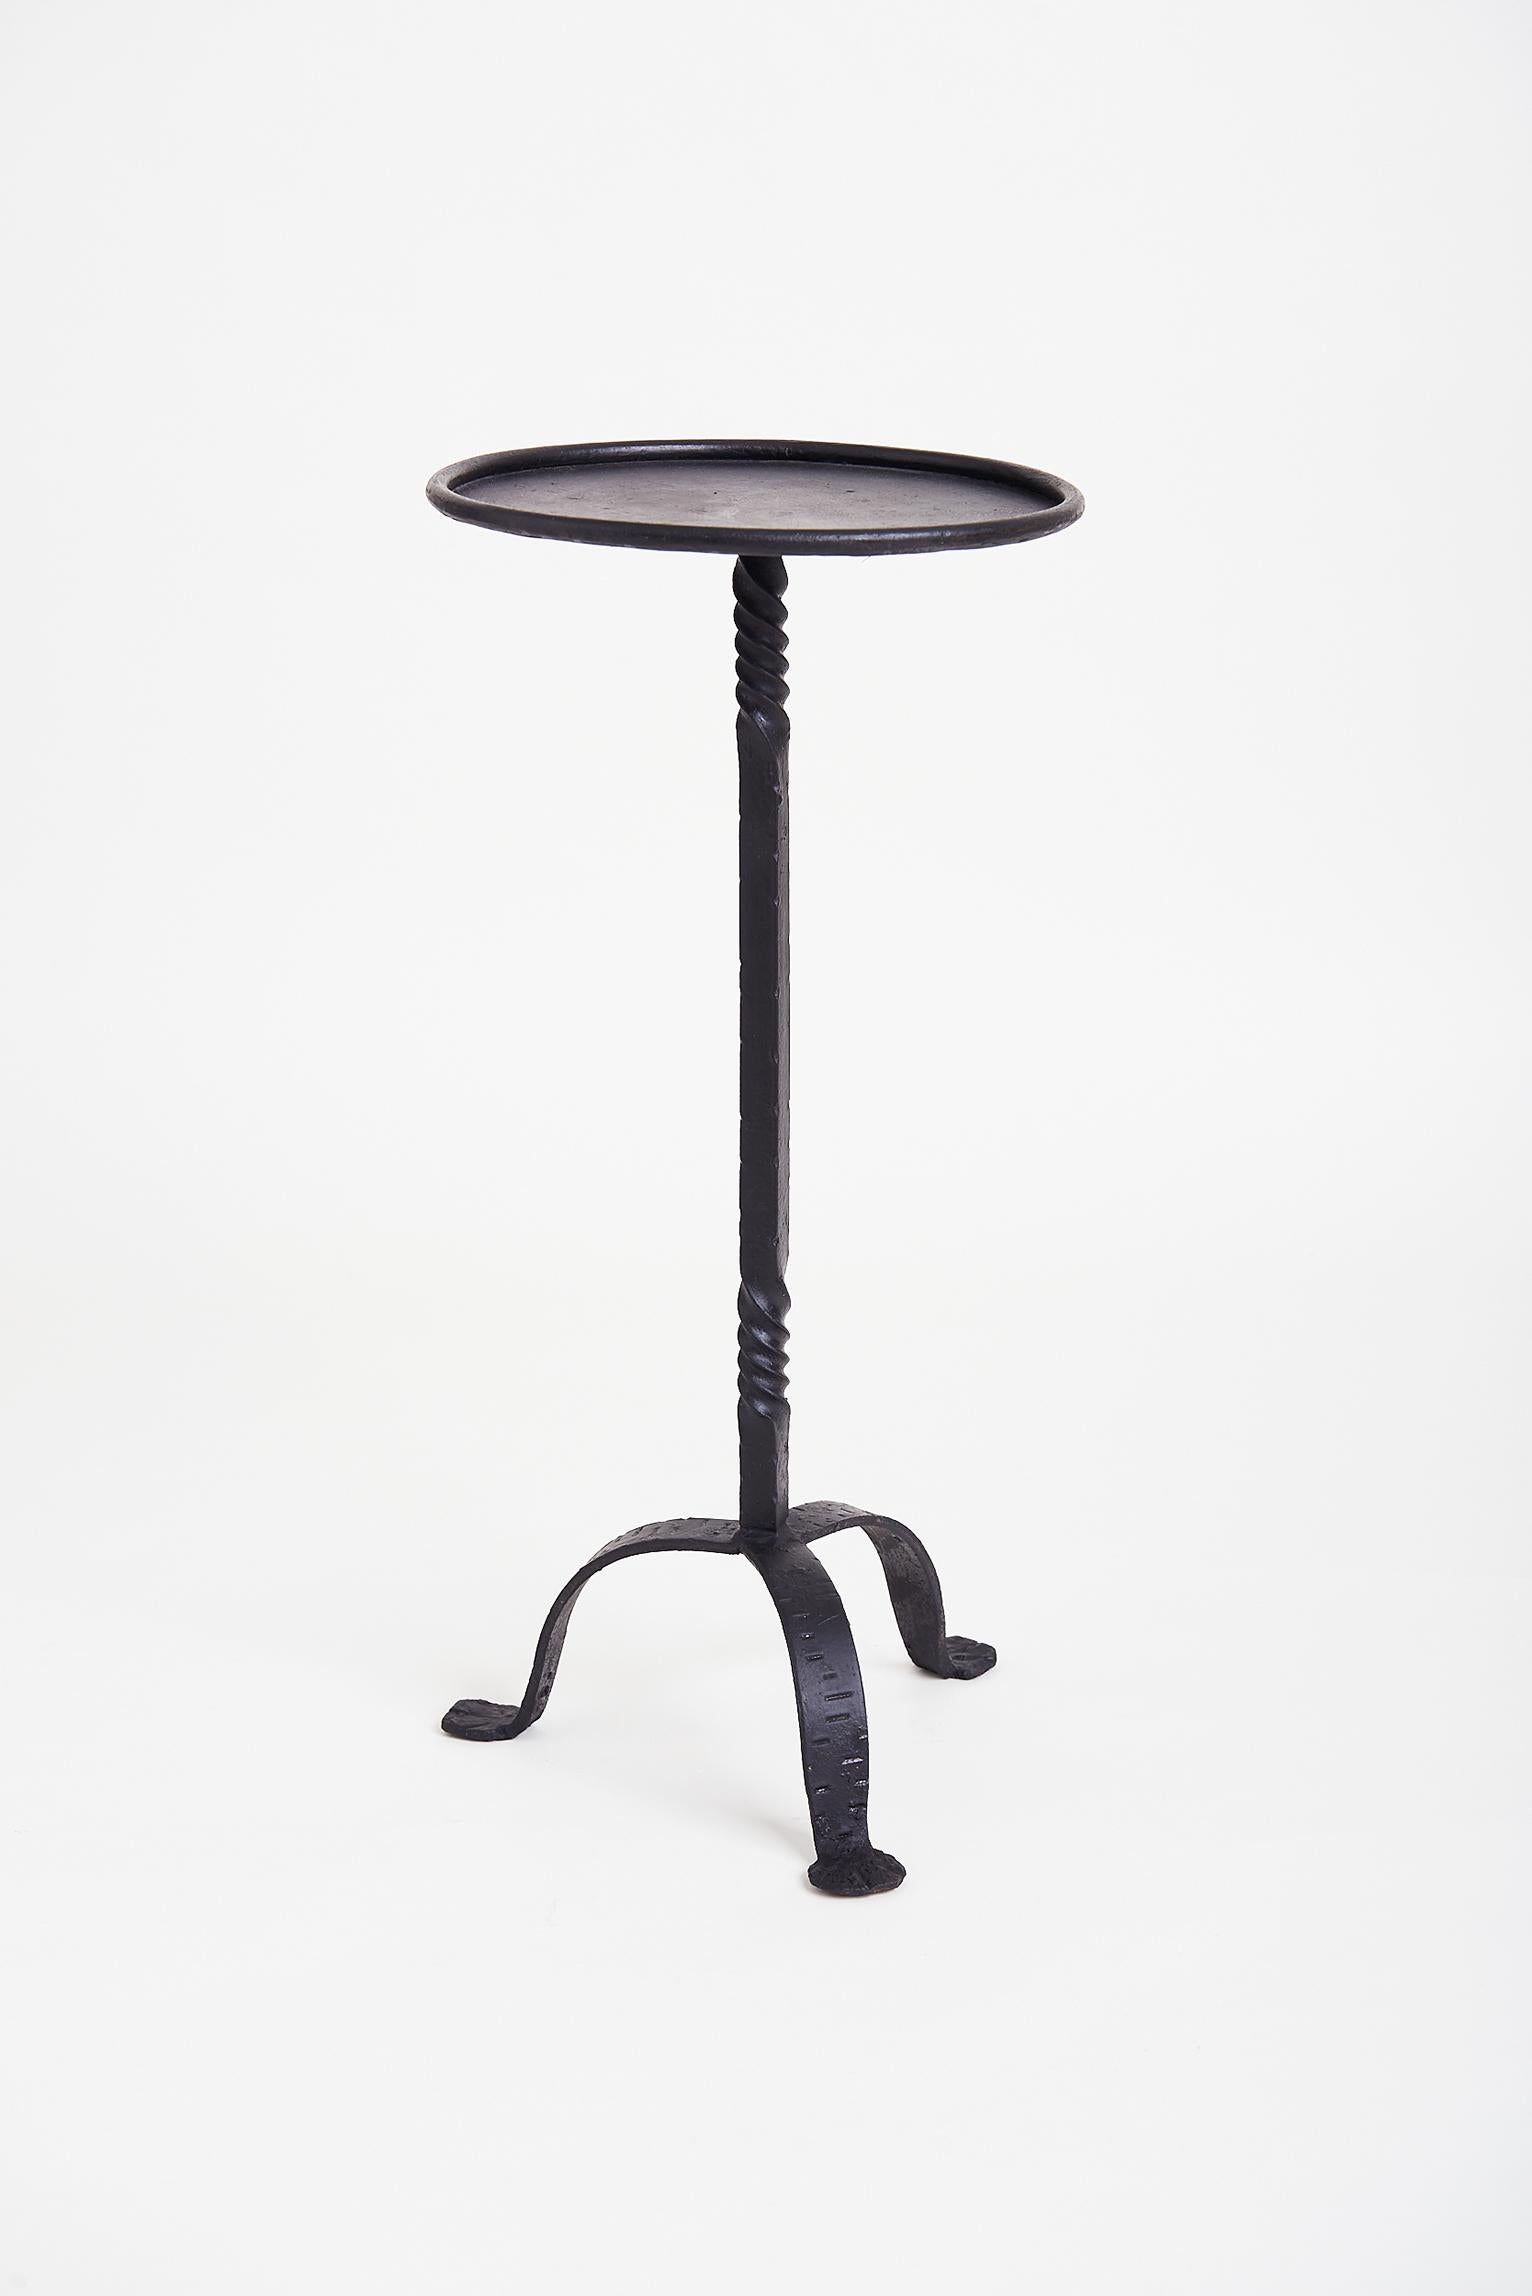 A black enameled wrought iron martini table.
Spain, third quarter of the 20th century.